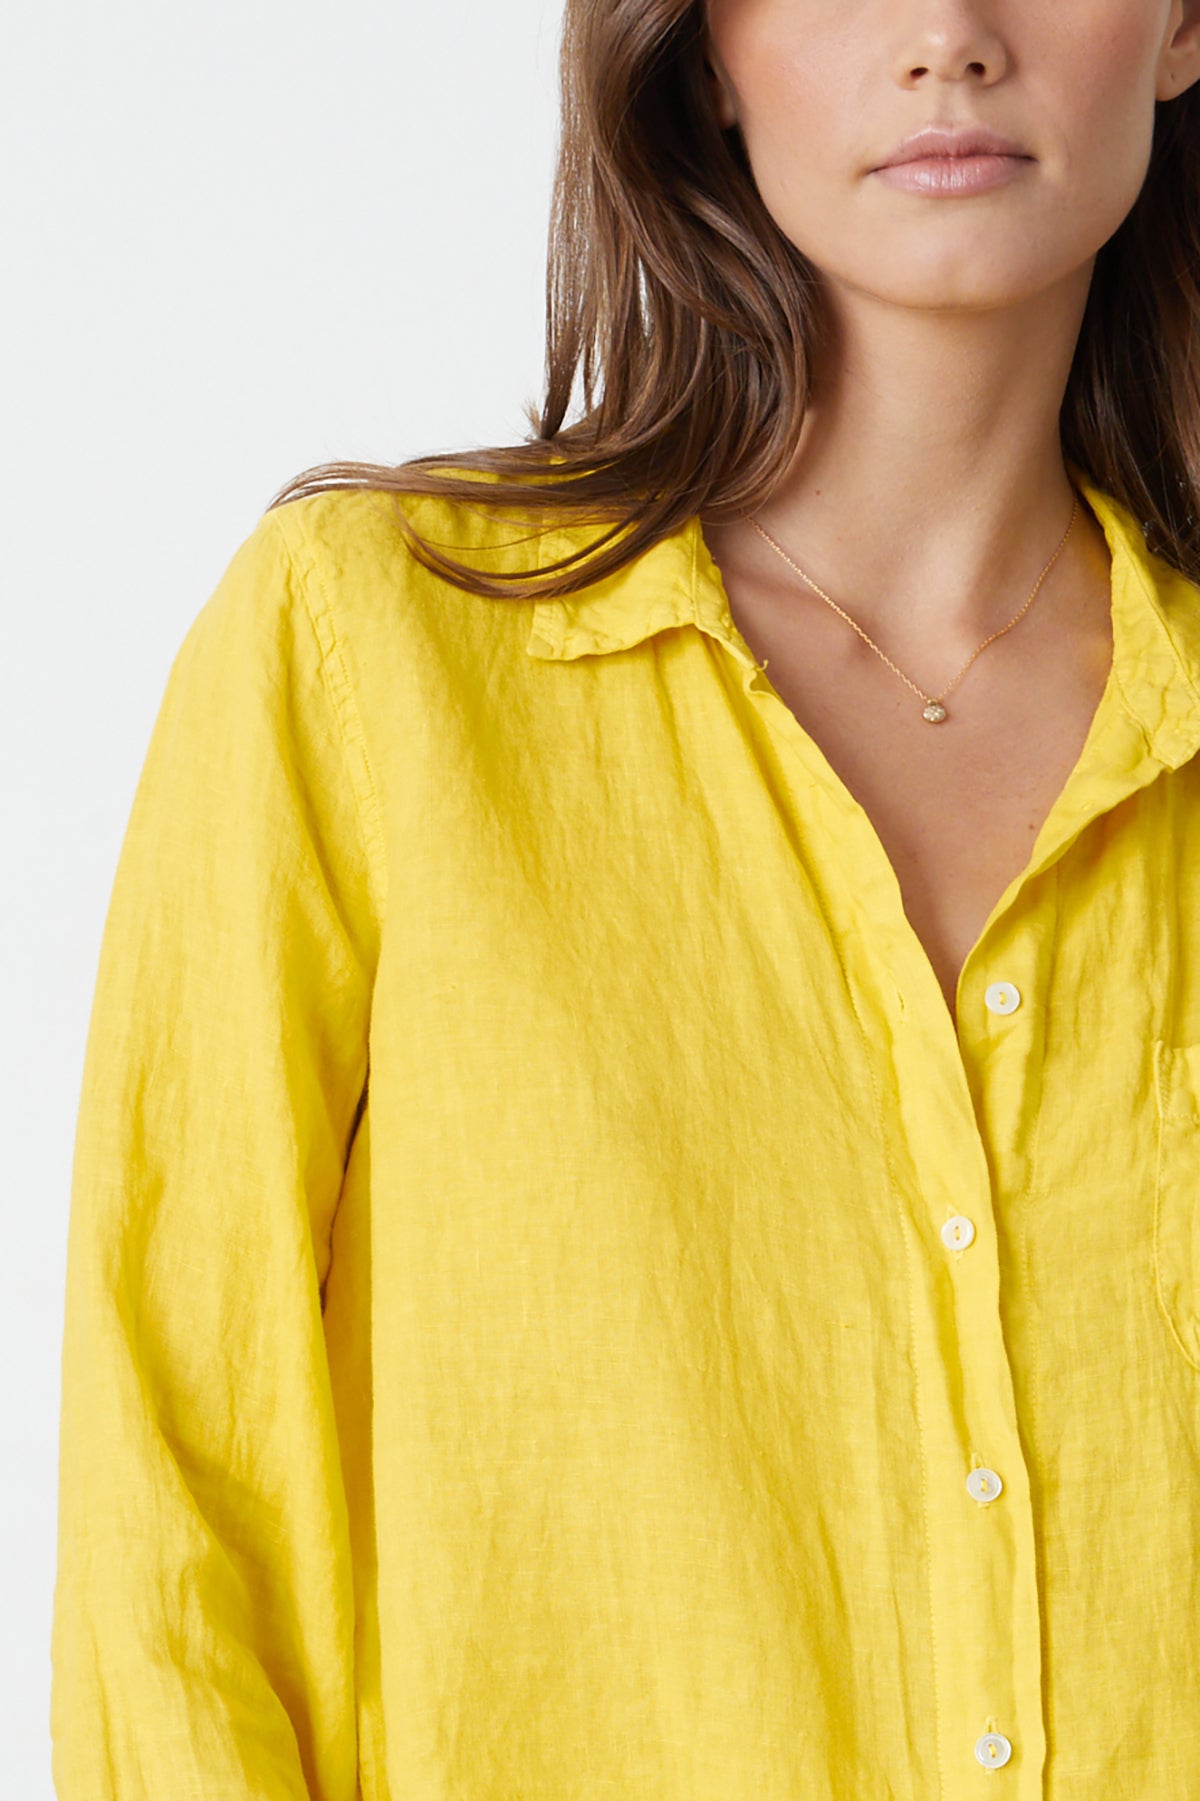   Natalia Button-Up Shirt in bright yellow sun colored linen close up front with necklace 